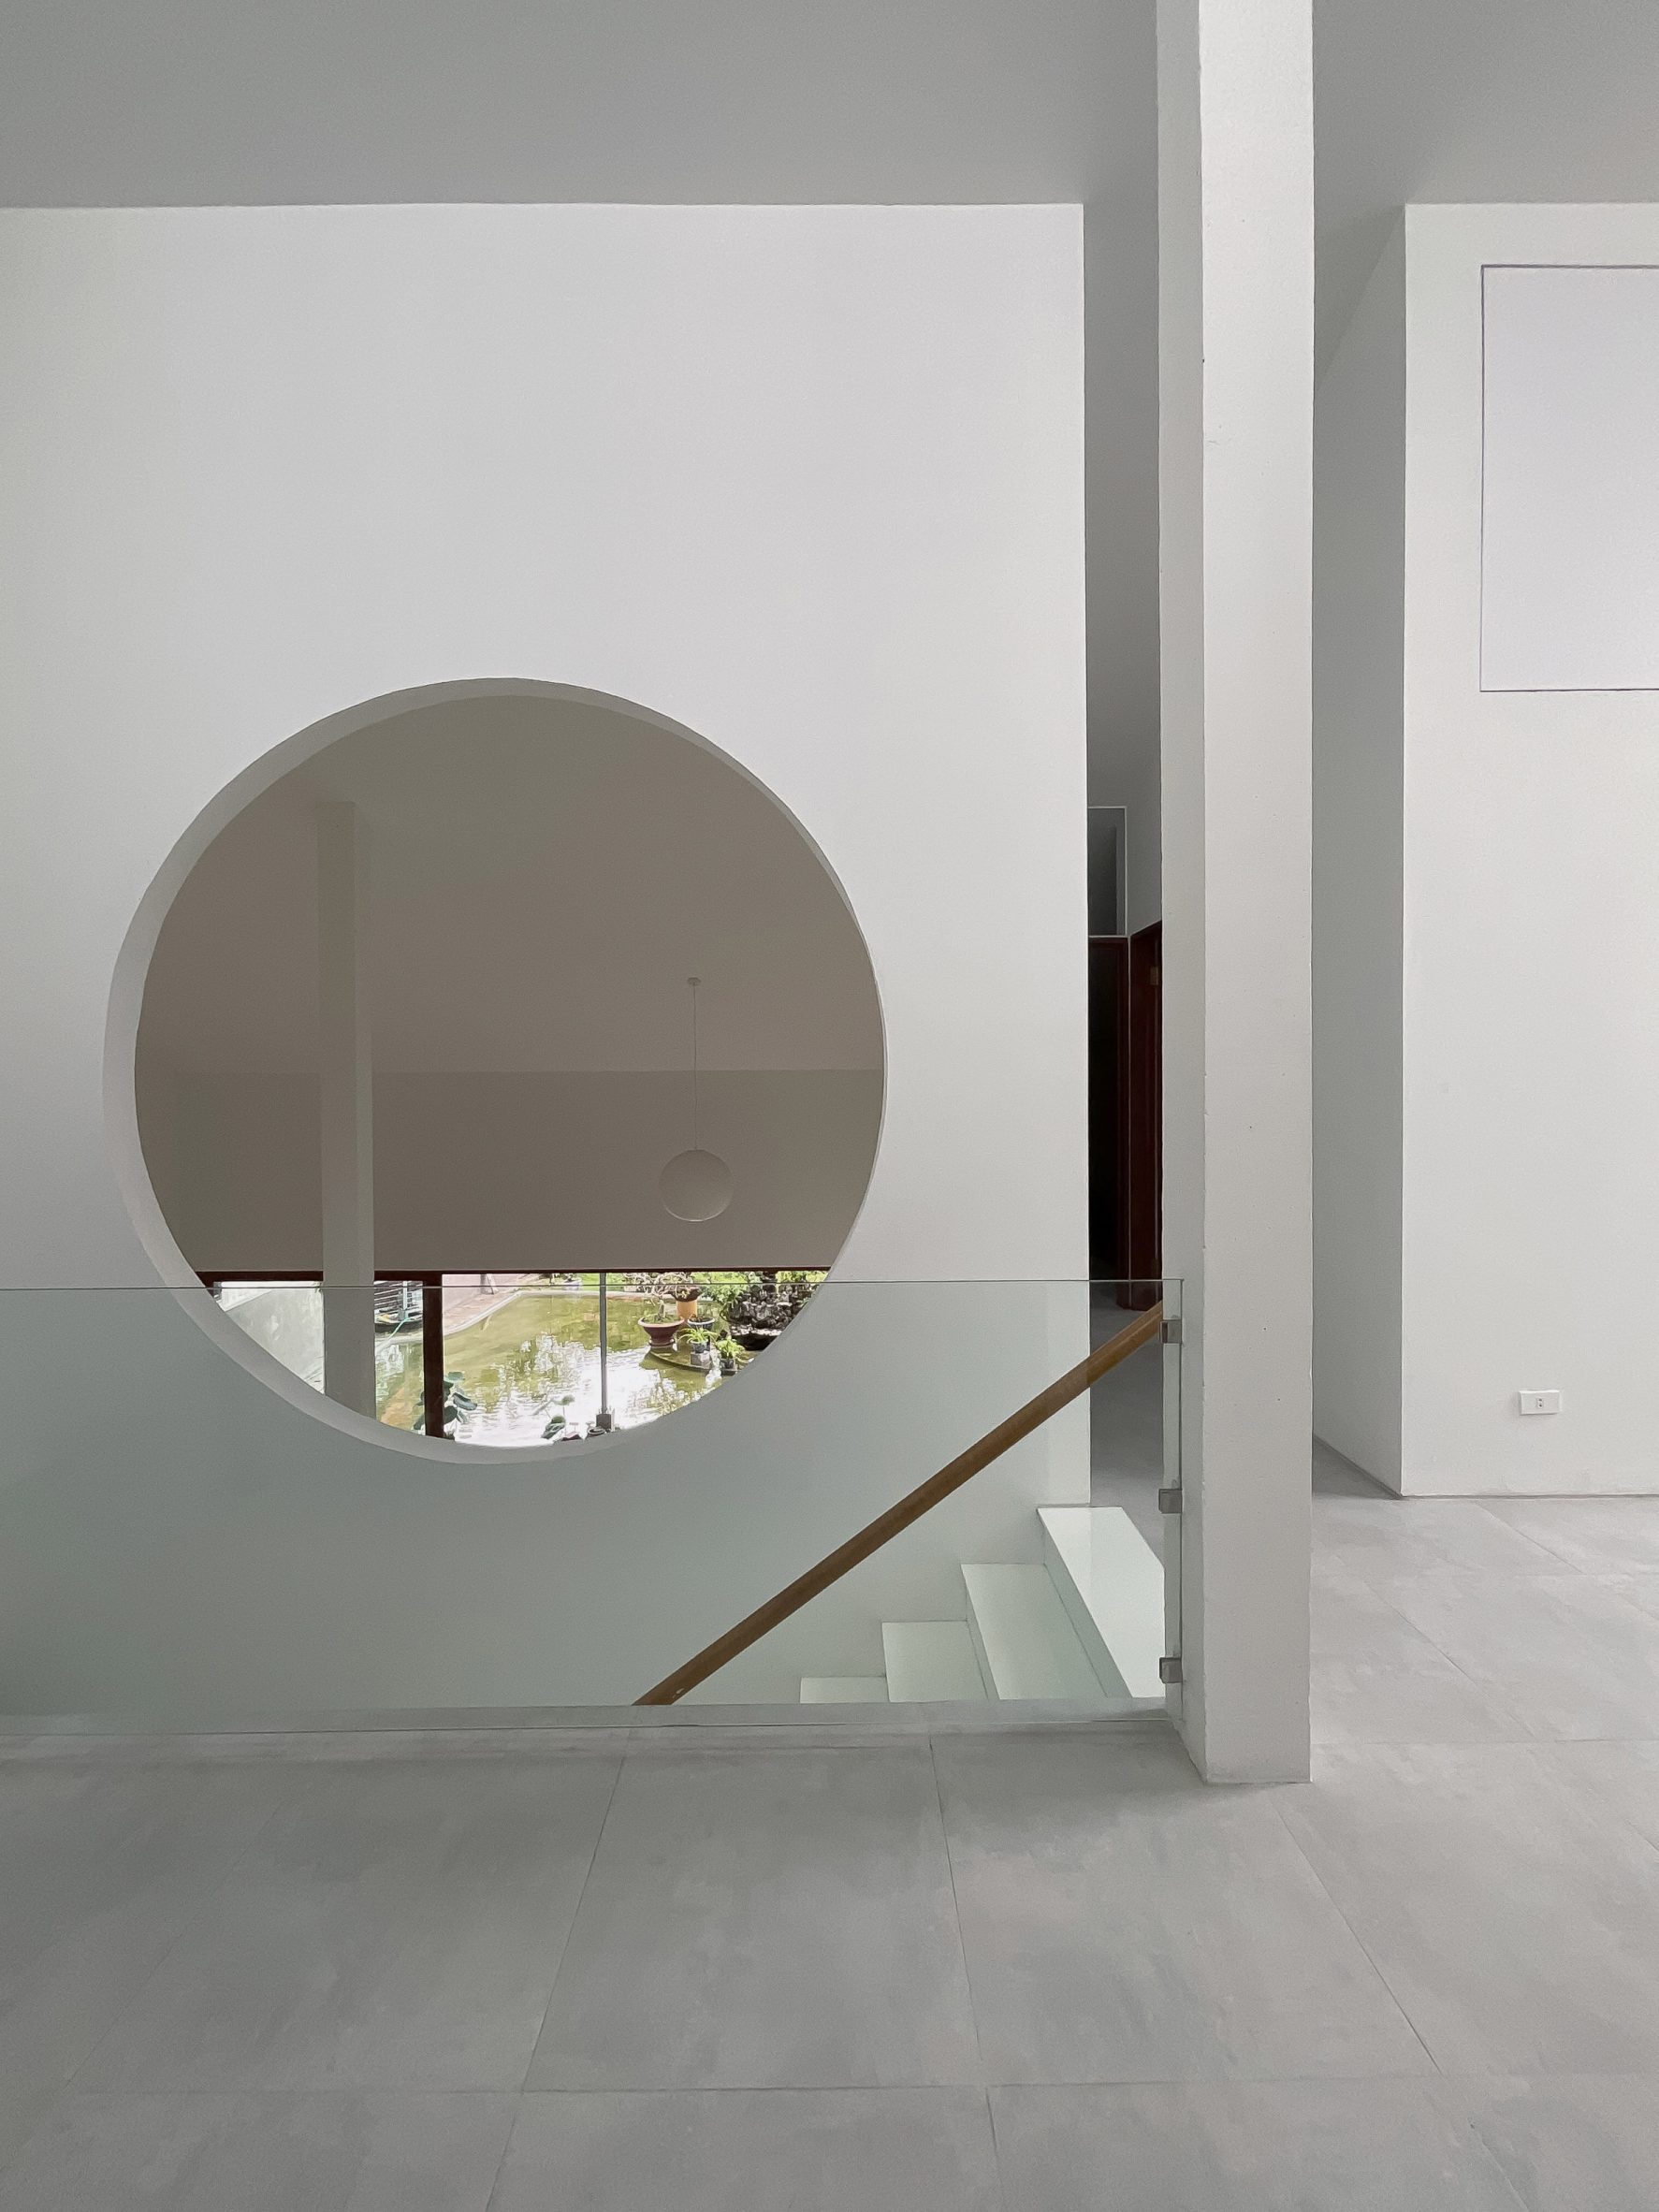 Interior space with white walls, a staircase and circular opening